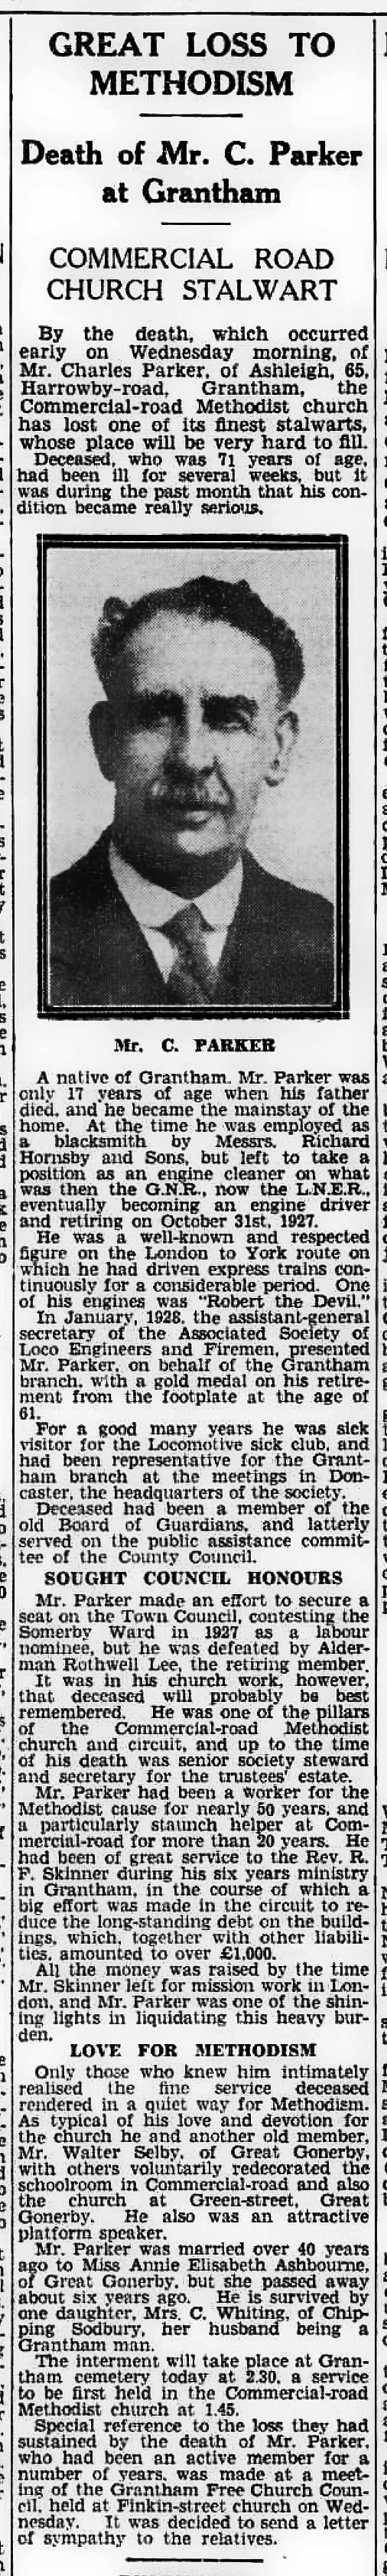 Charles Parker's obituary in The Grantham Journal of 16th October 1937. From The British Newspaper Archive http://www.britishnewspaperarchive.co.uk/ Image © THE BRITISH LIBRARY BOARD. ALL RIGHTS RESERVED.